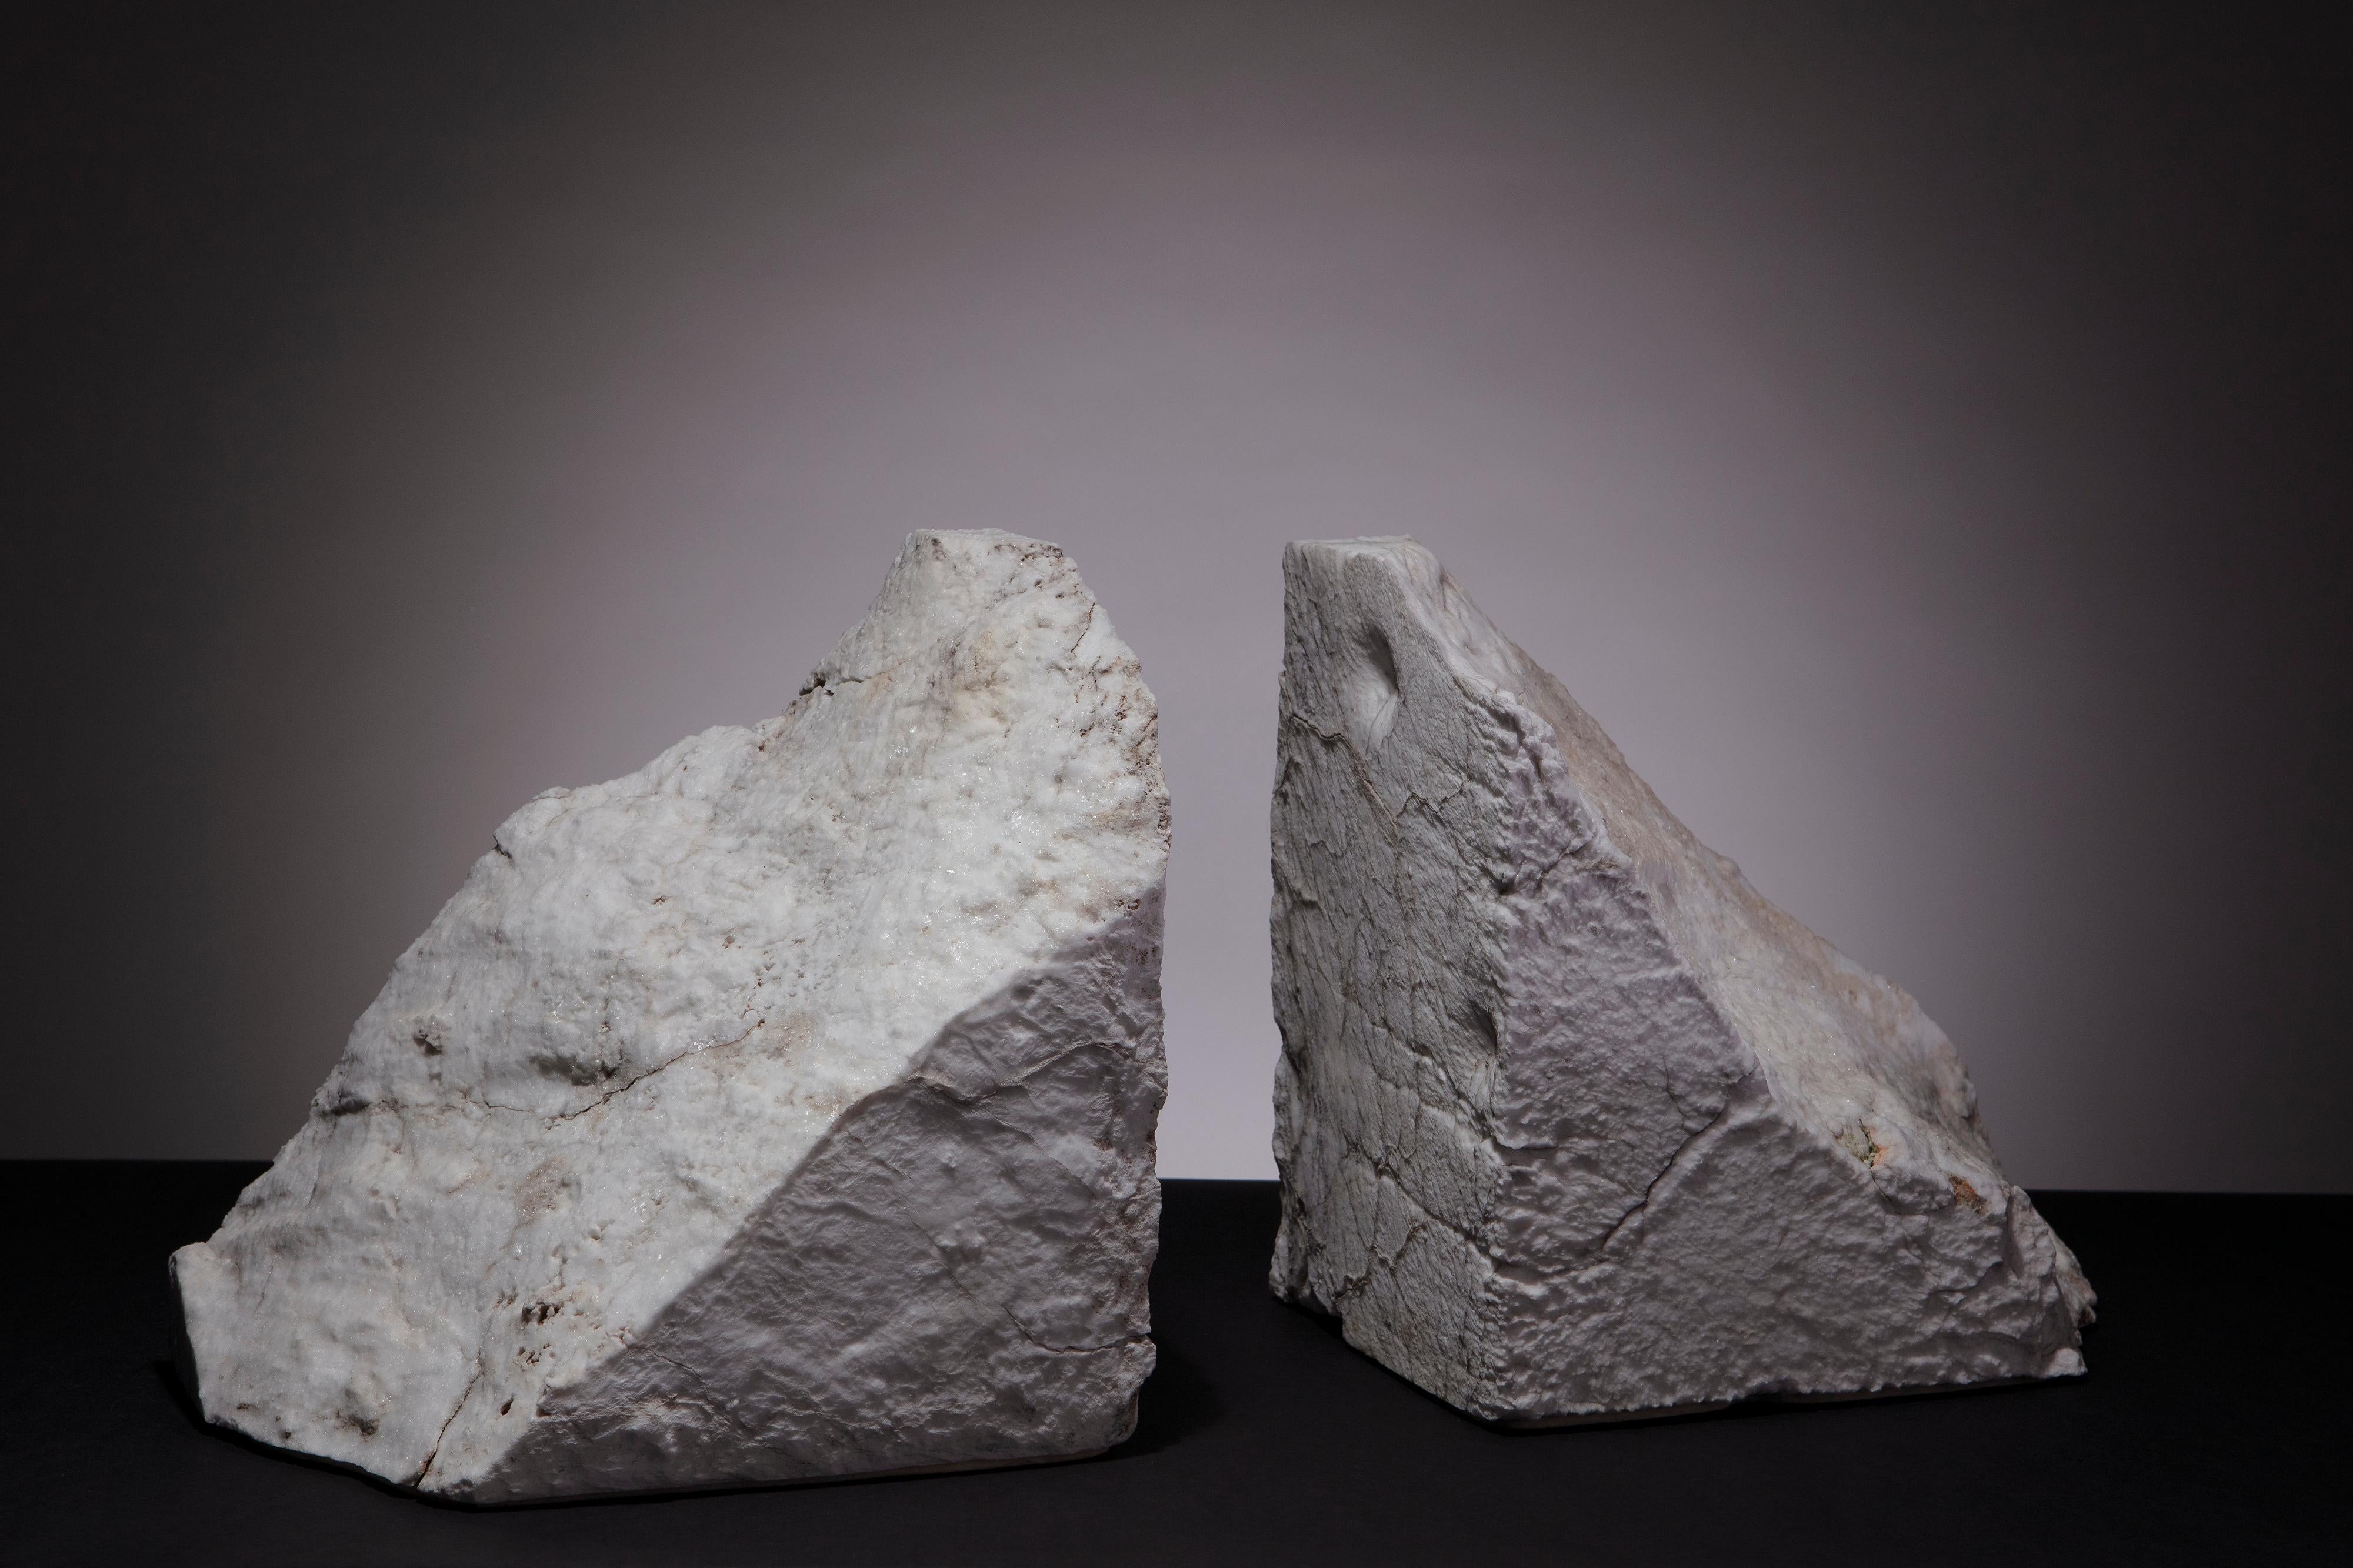 Refined and rugged marble mountain bookends. 
Listing for one pair of bookends.
One of a kind.

Dimensions:
A - 7 3/4